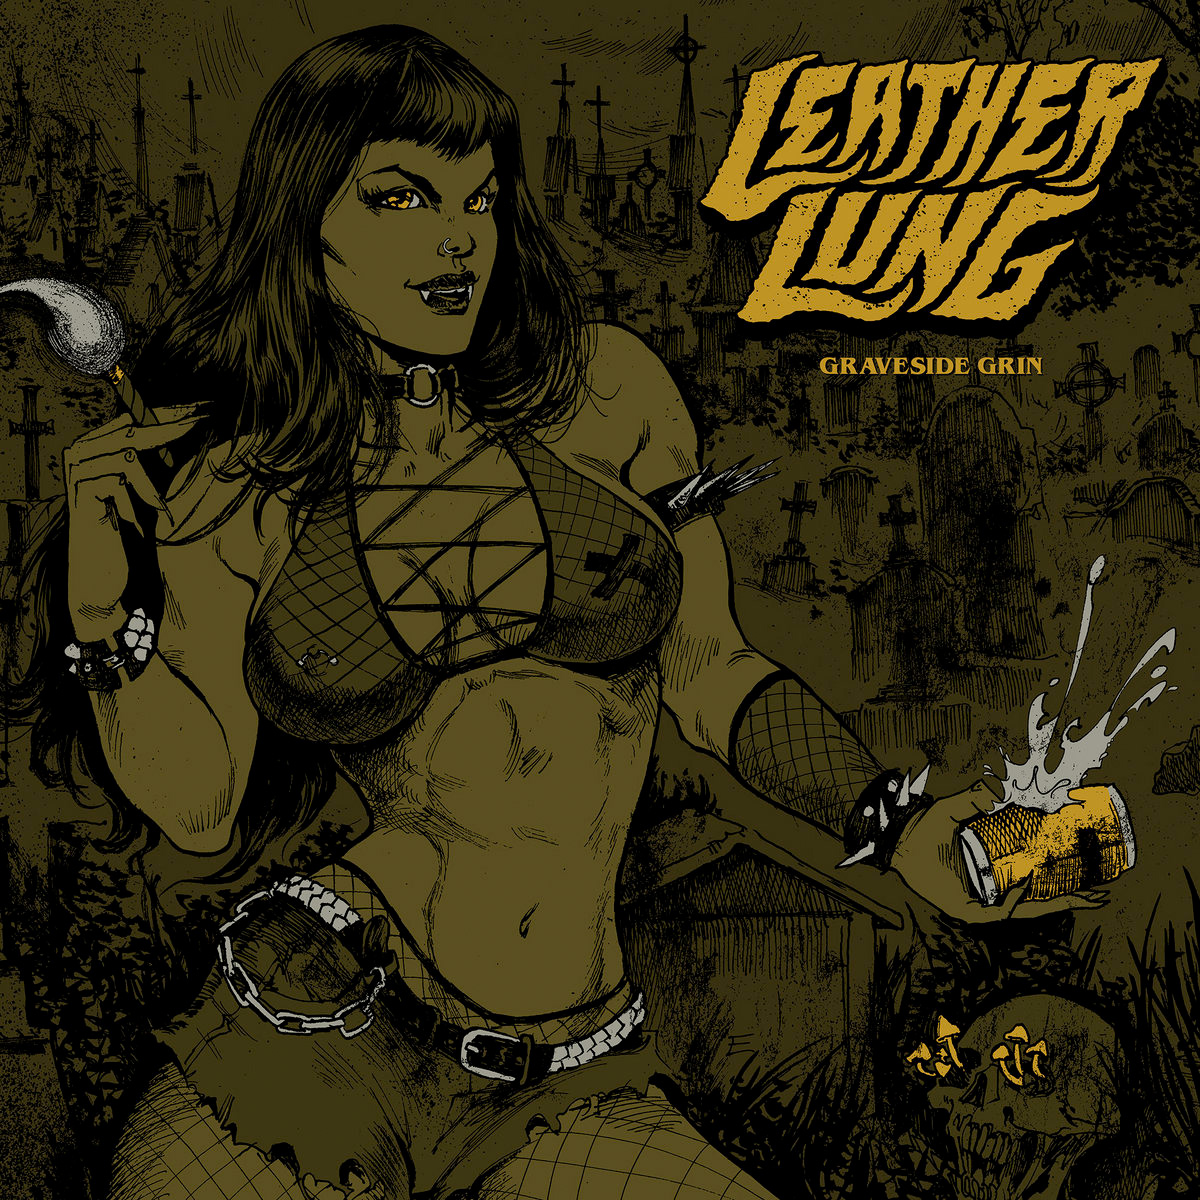 Graveside Grin by Leather Lung